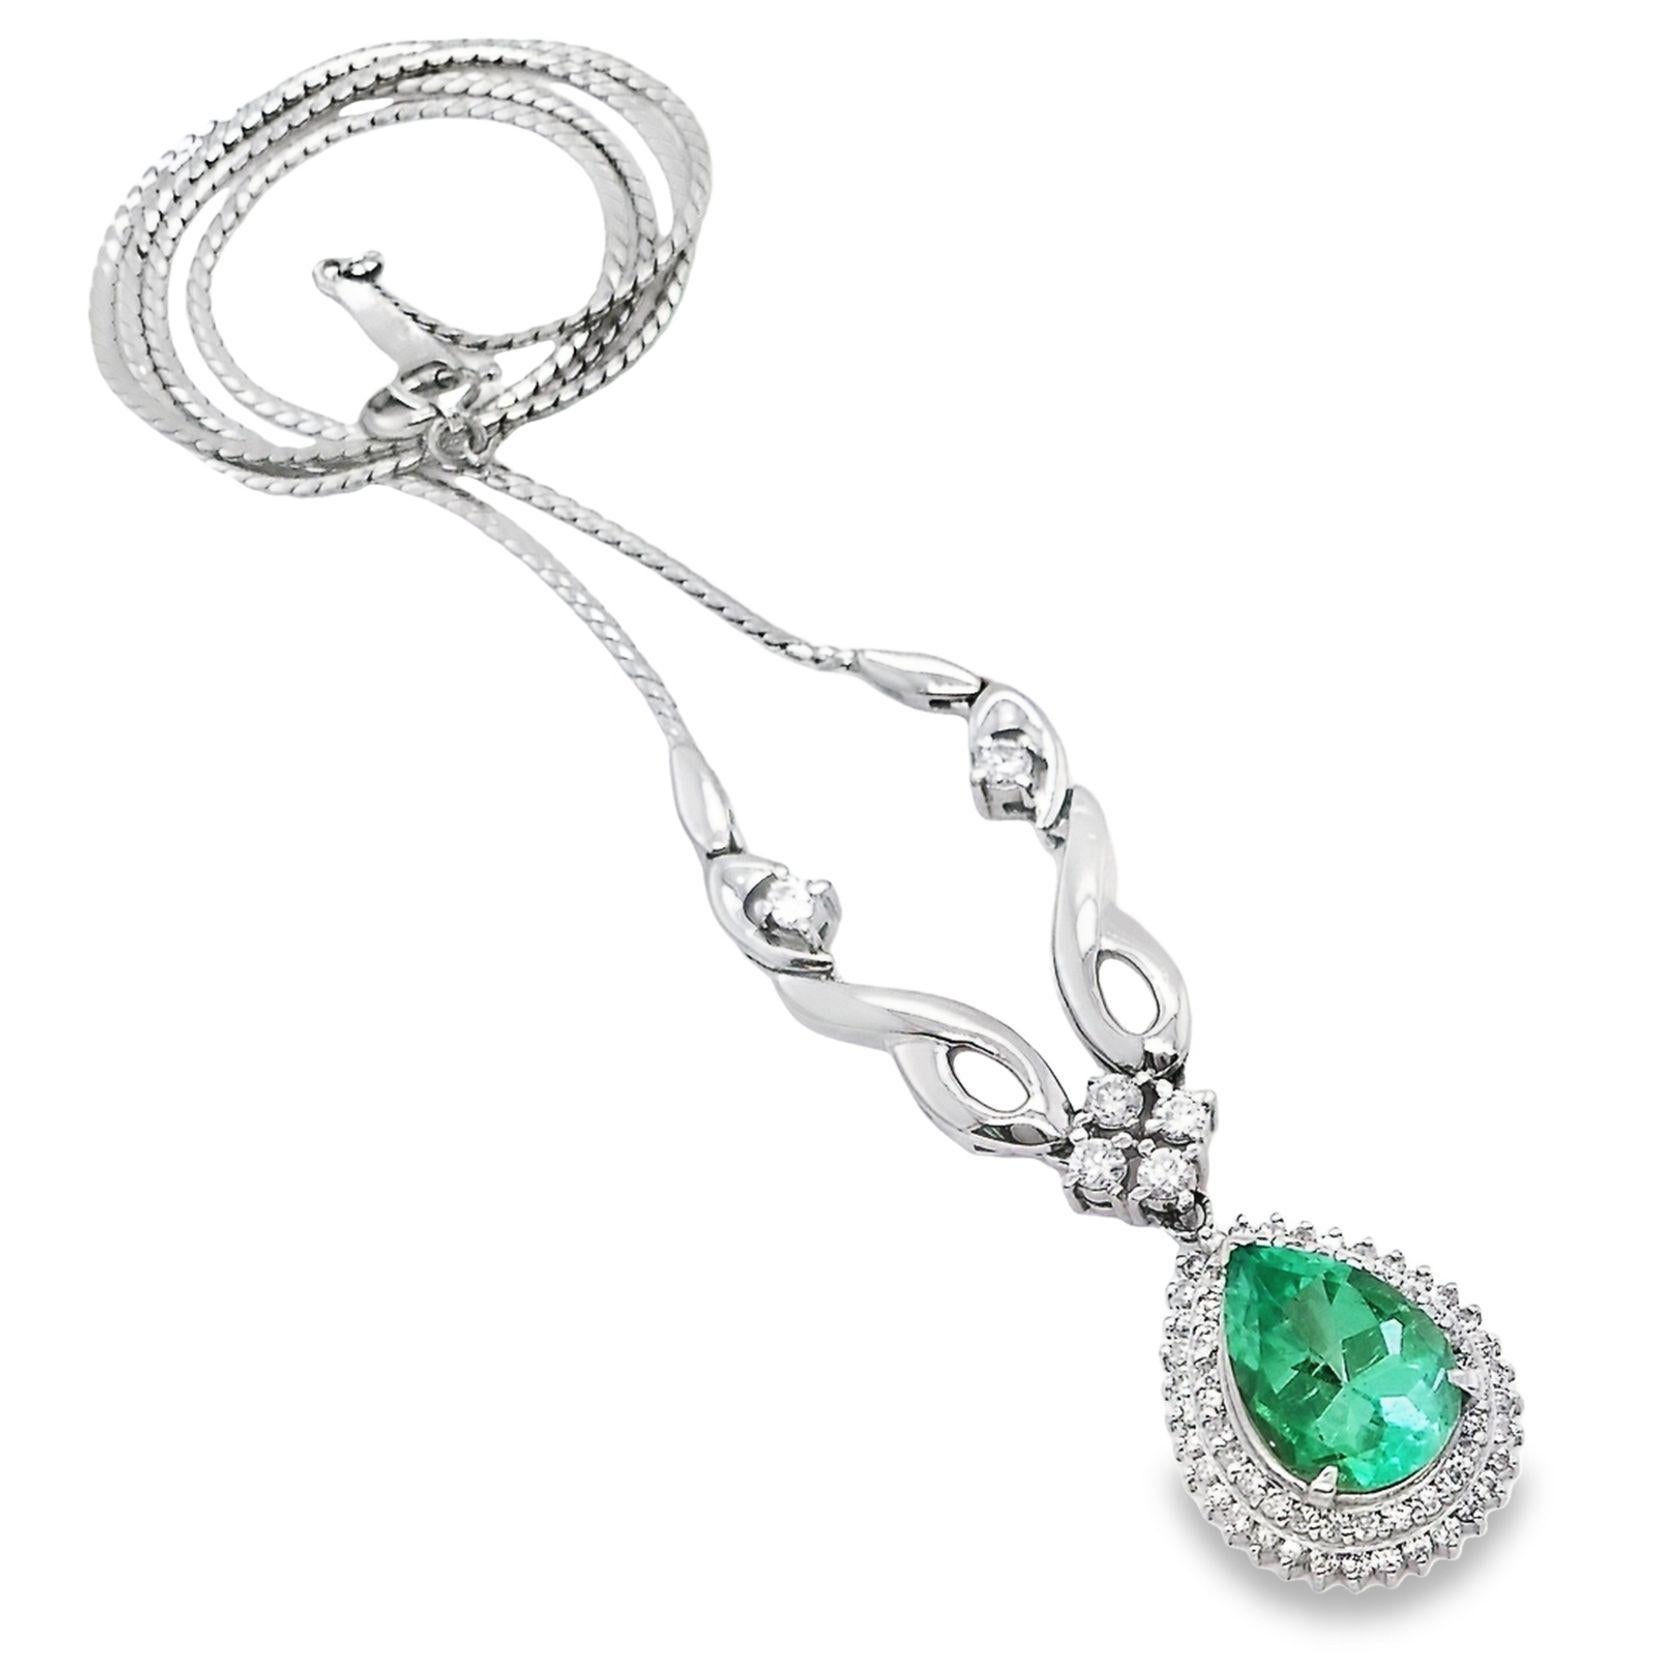 This sumptuous Colombian emerald necklace, from Top Crown Jewelry, is adorned by natural round brilliant-cut diamonds suspended on a light decorated platinum necklace. 
The necklace is 42 cm long. The pendant size is 25mm x 15mm.
This sparkling pear